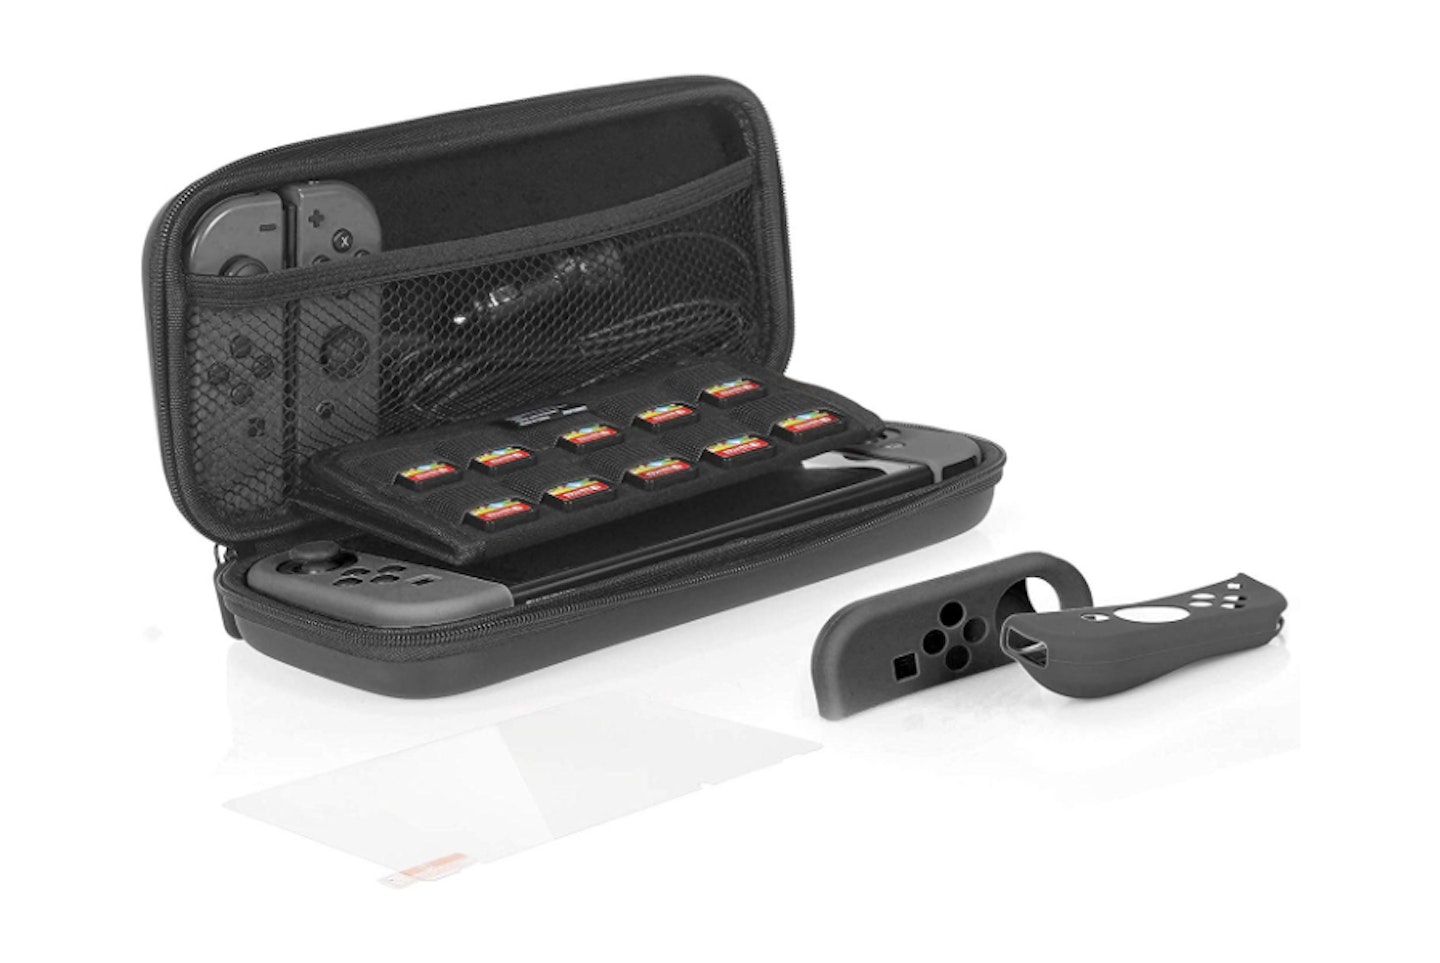 Protection Kit for Nintendo Switch with Carrying Case and Tempered-glass Screen Protector – Black, WAS £12.99 NOW £9.74